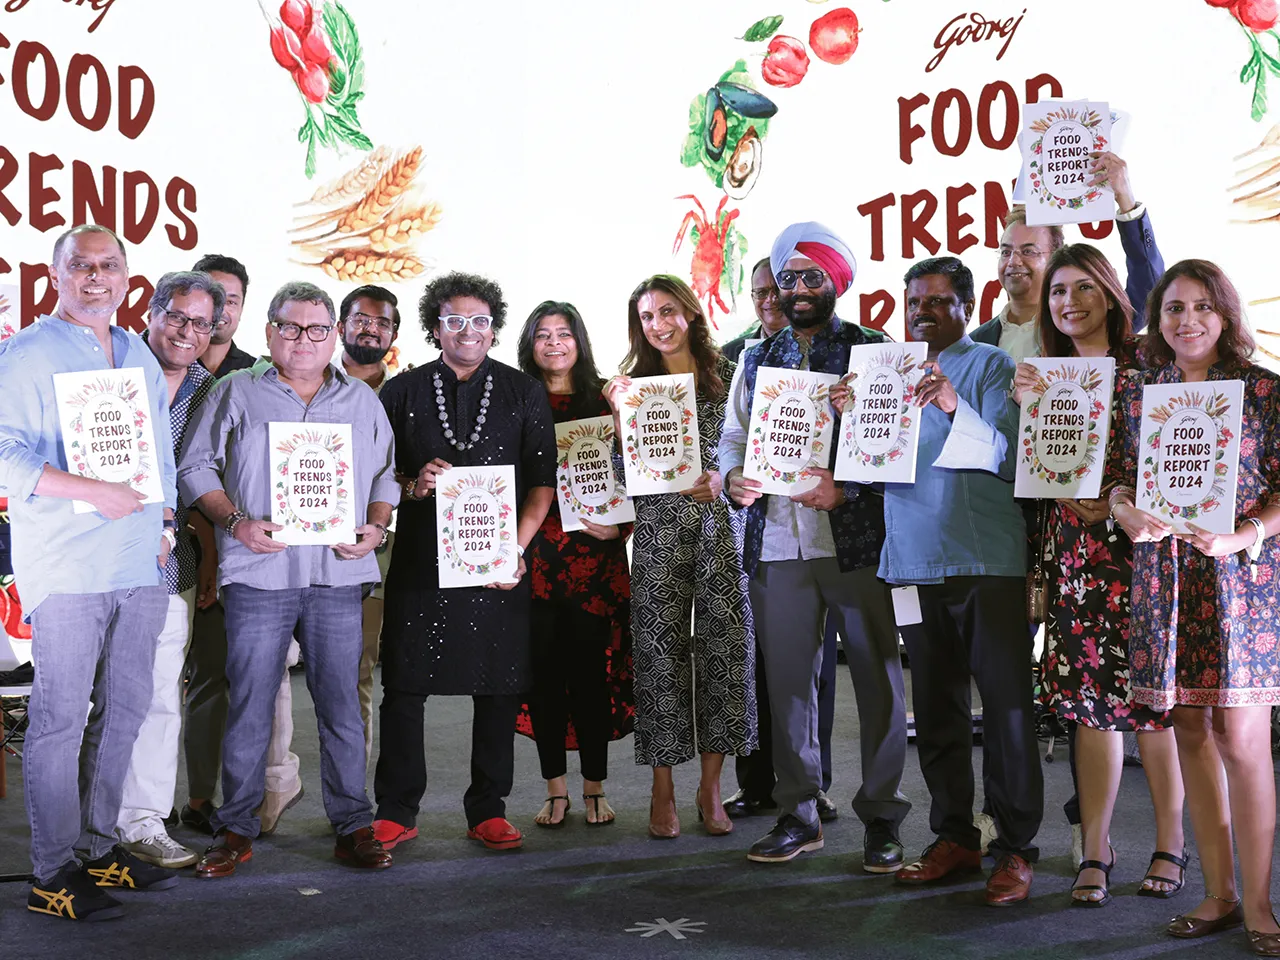 From rise in Ghee to K-food, Godrej Food Trends Report 2024 unveils key culinary shifts